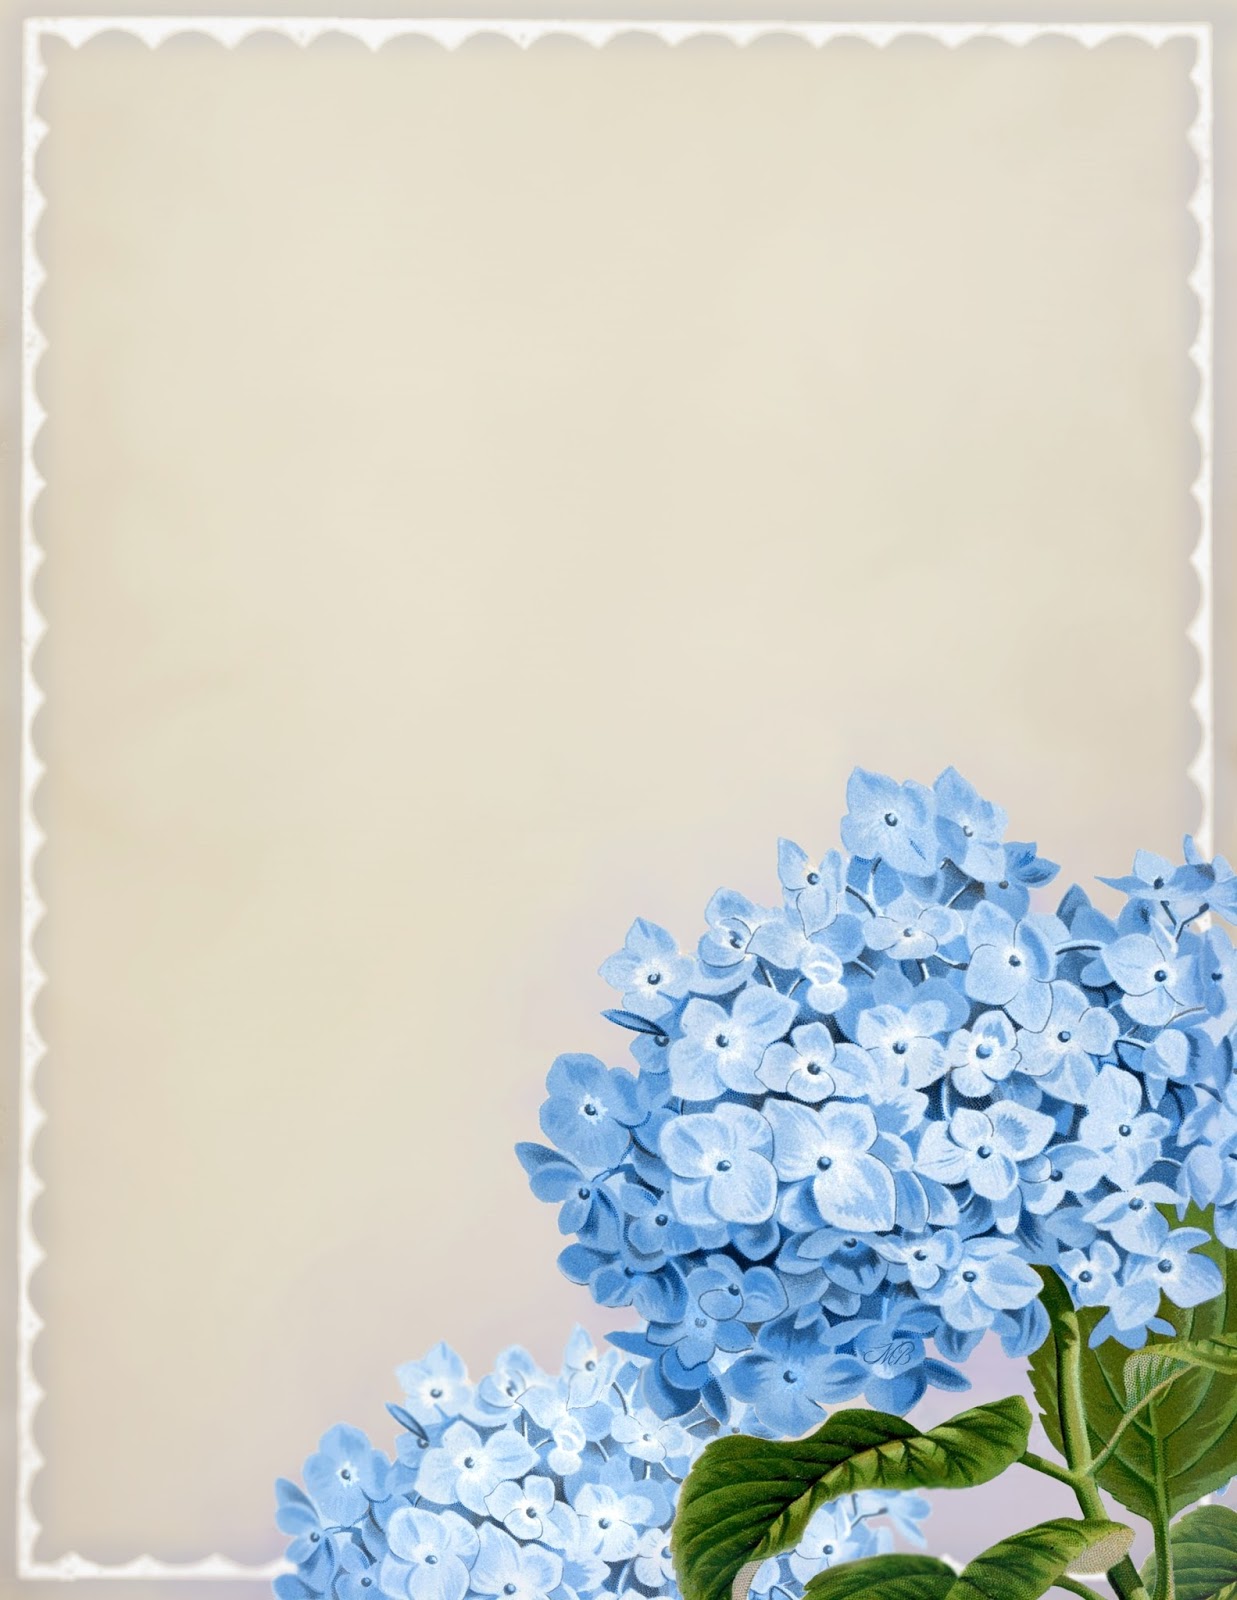 Of 4 Notepapers 4 X 5 Each Vintage Blue Hydrangea Stationery 8 5 X 11